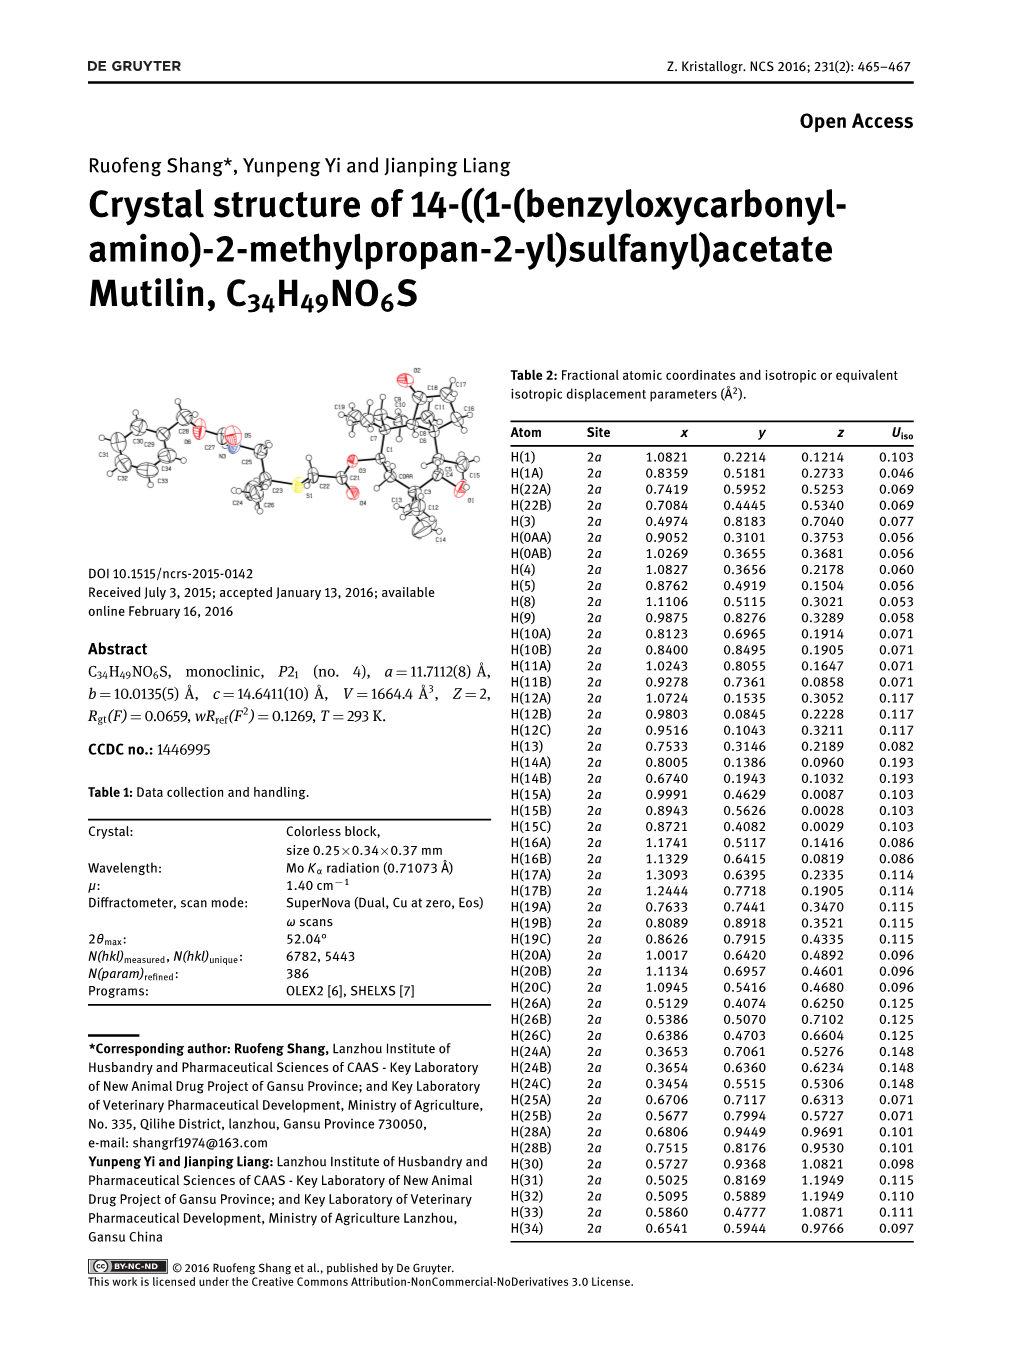 Crystal Structure of 14-((1-(Benzyloxycarbonyl-Amino